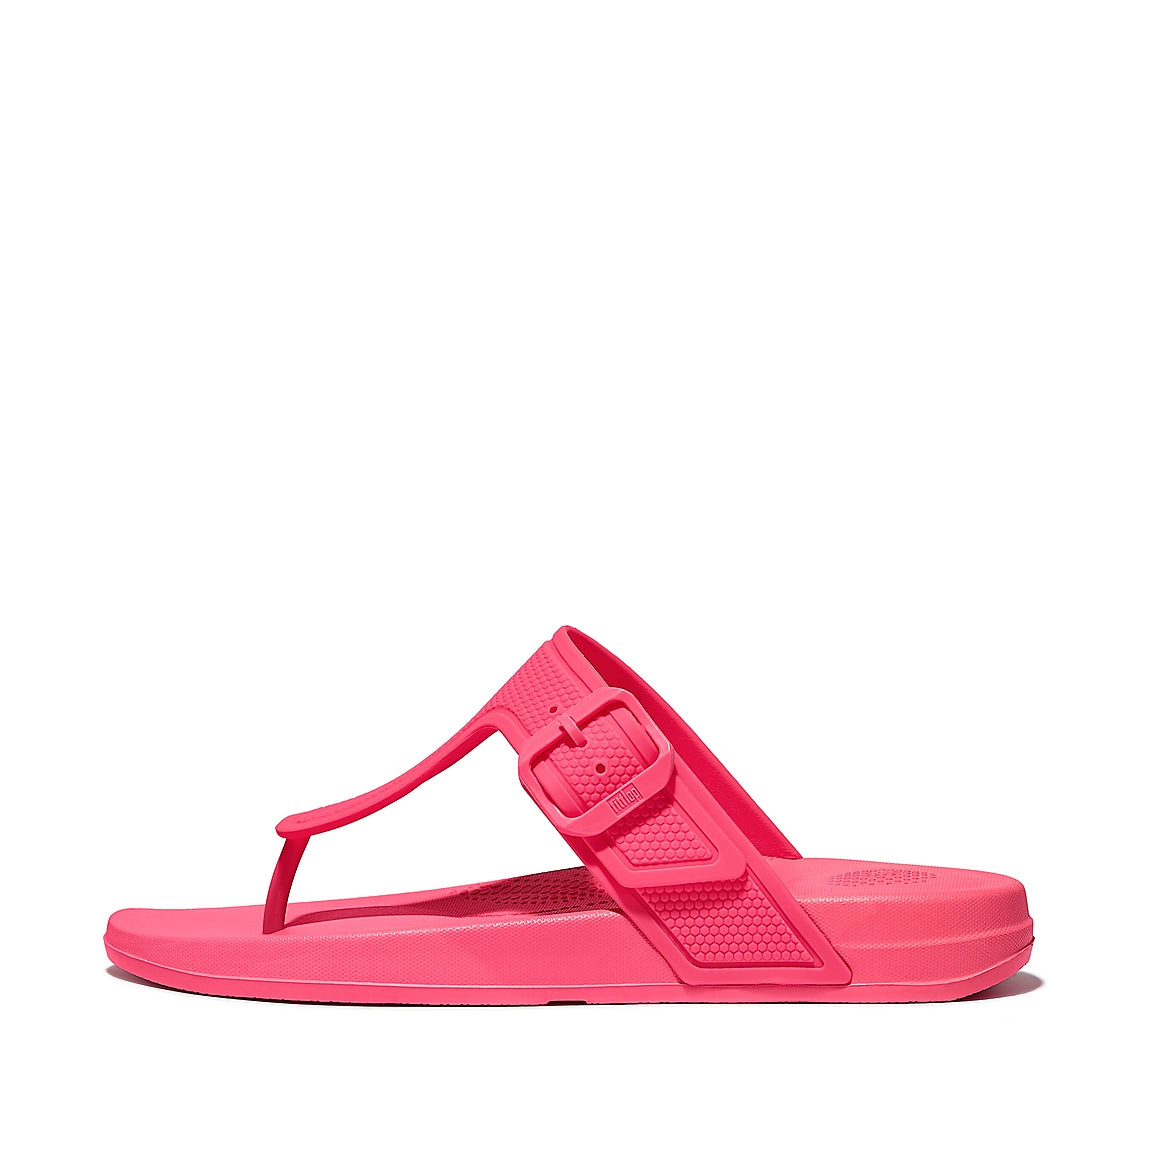 Fitflop Gb2 iQUSHION ADJ BUCKLE FLIP-FLOP